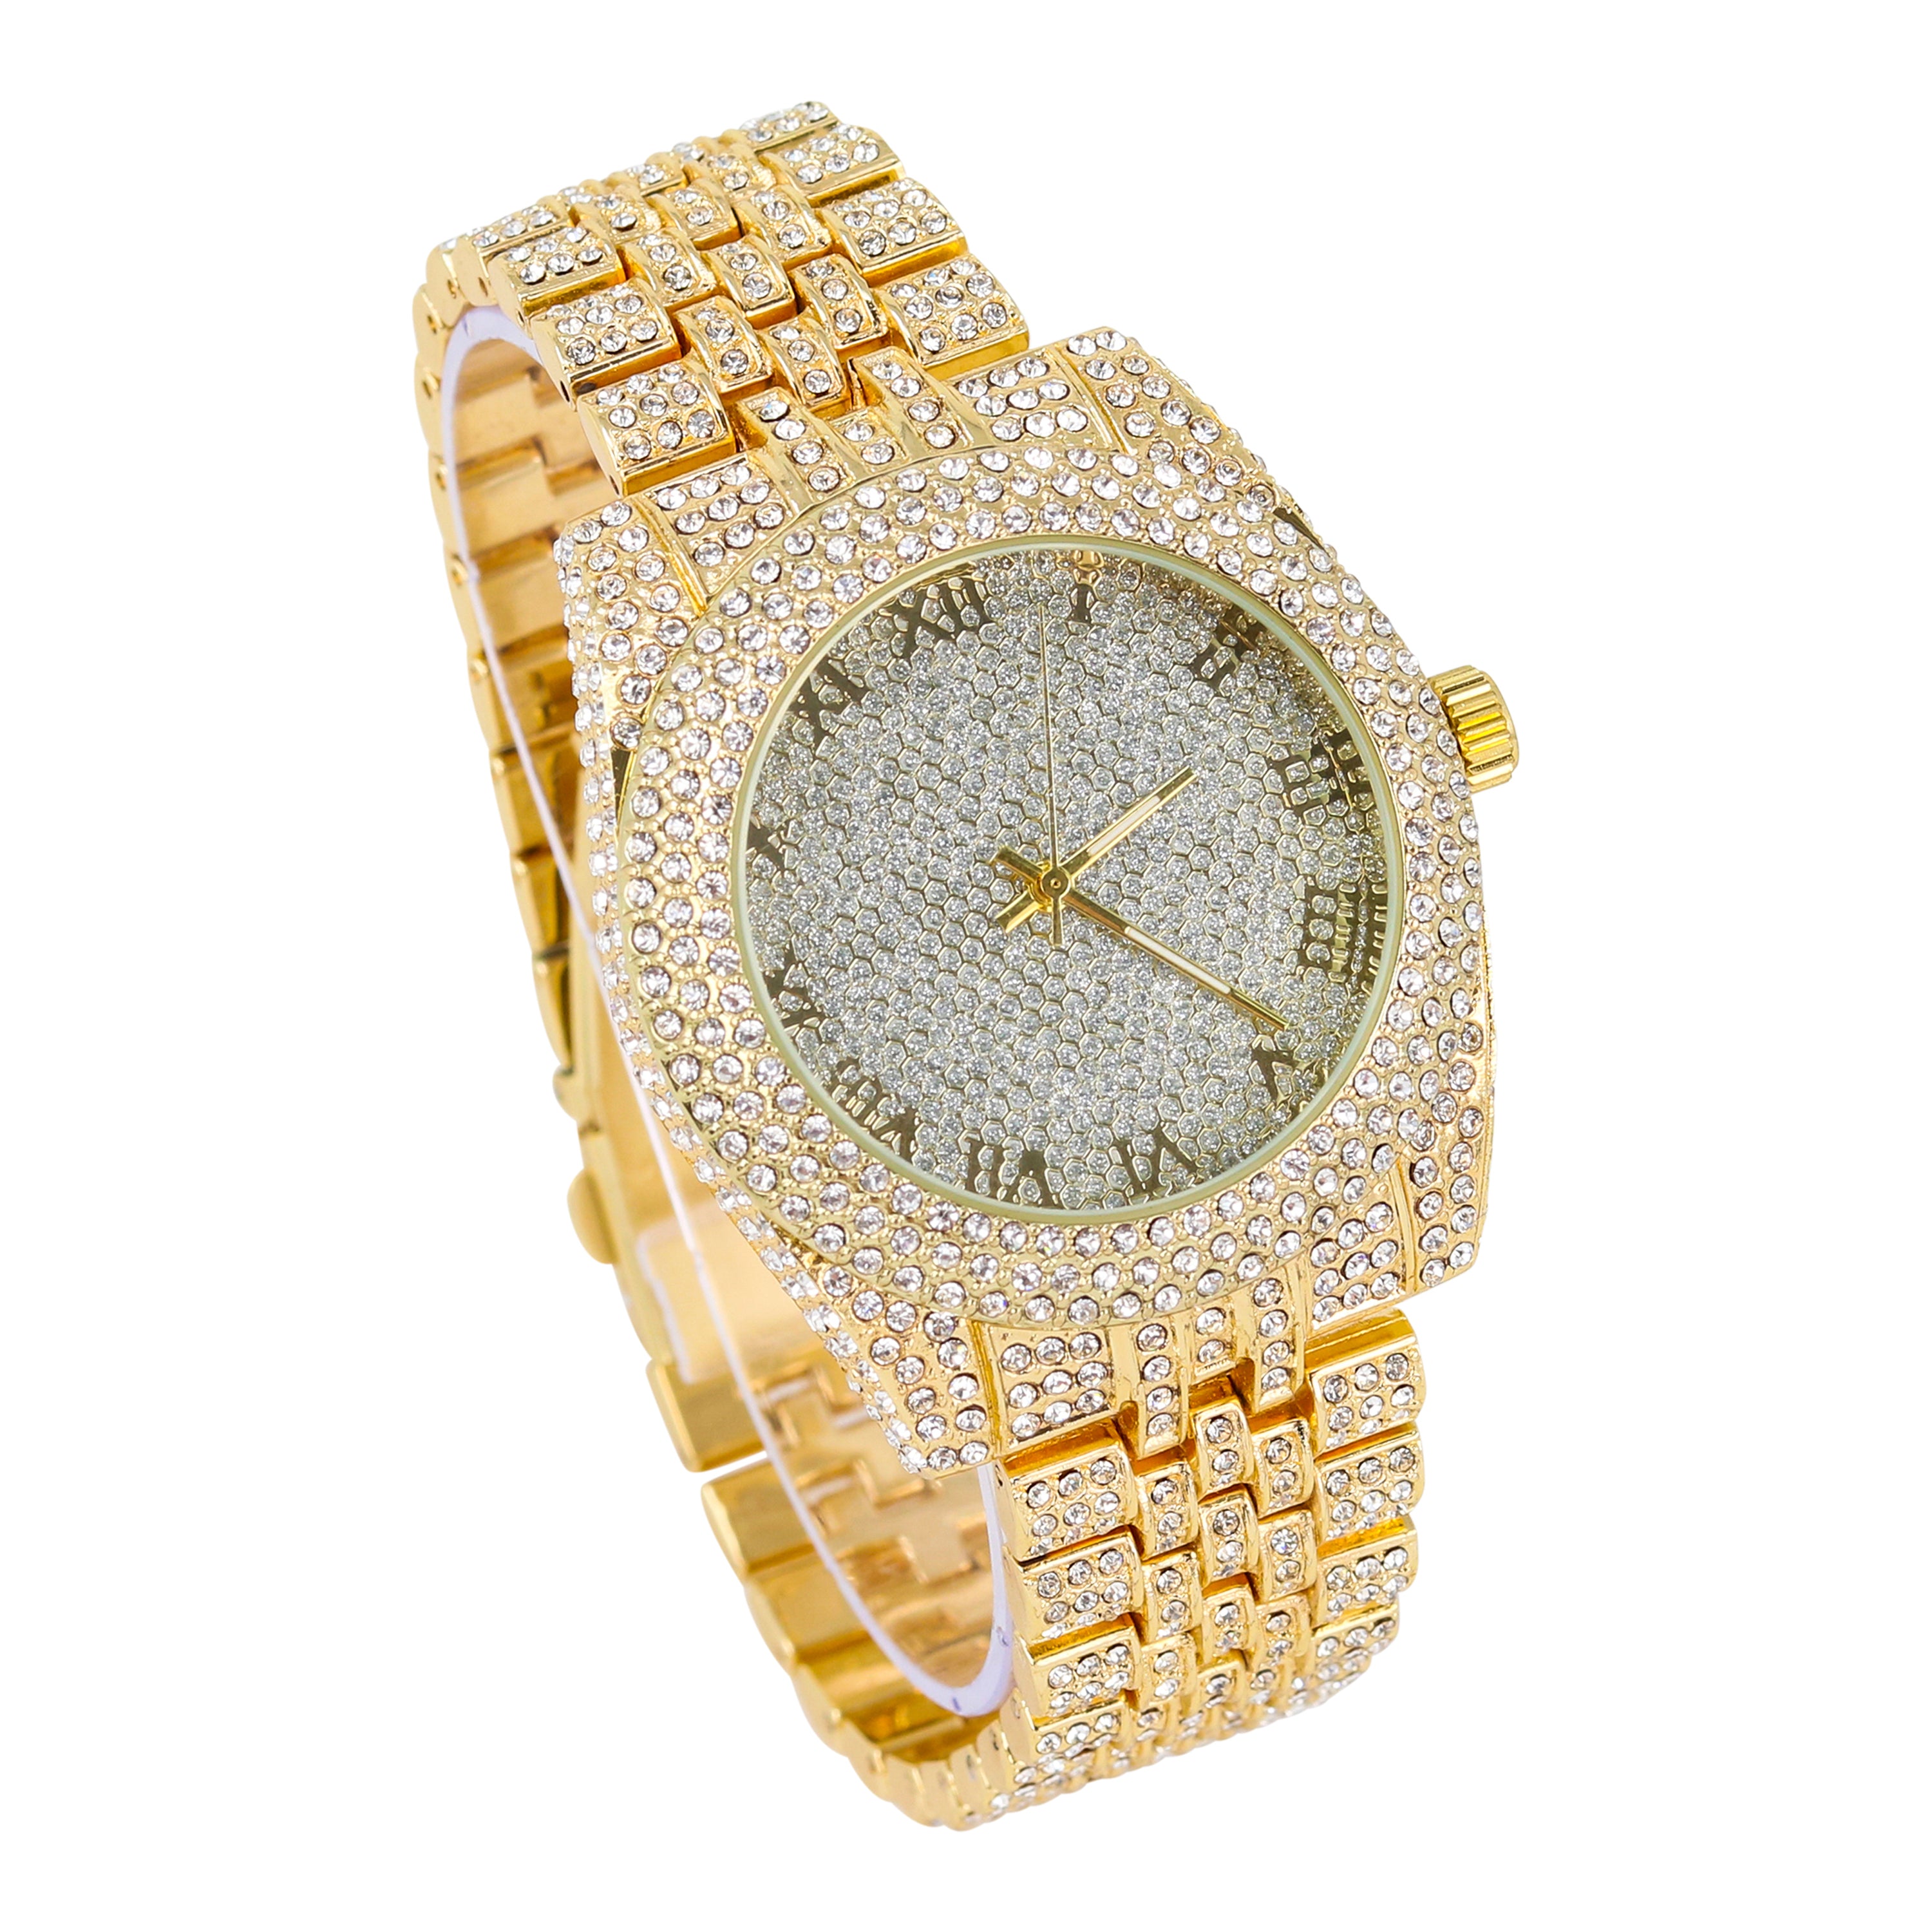 Men's Round Iced Out Watch 43mm Gold - Roman Dial